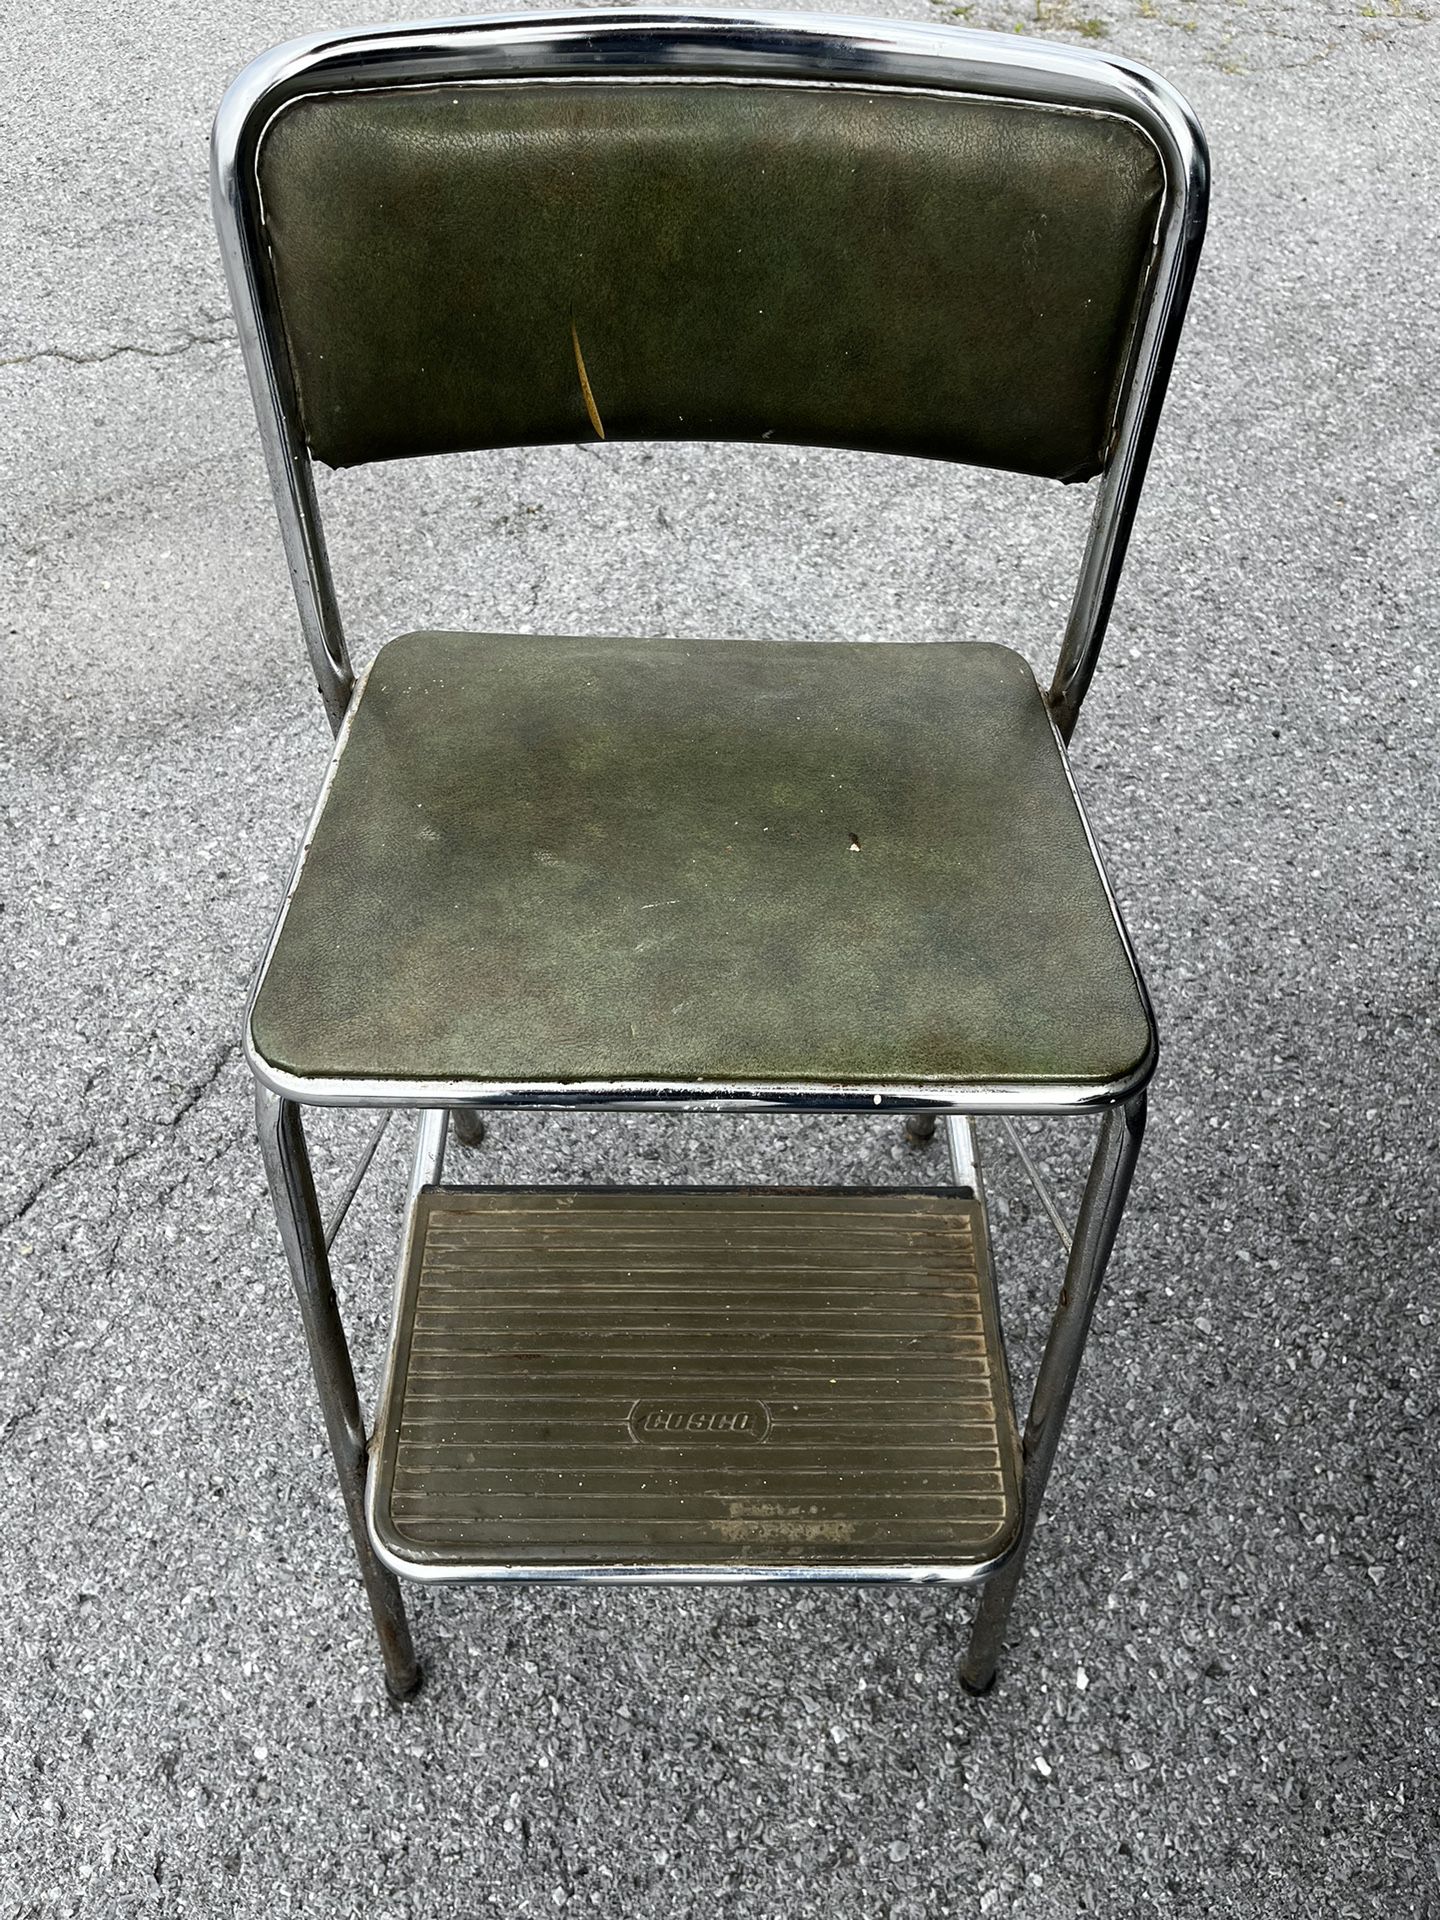 Costco Old Ing Stool Chair